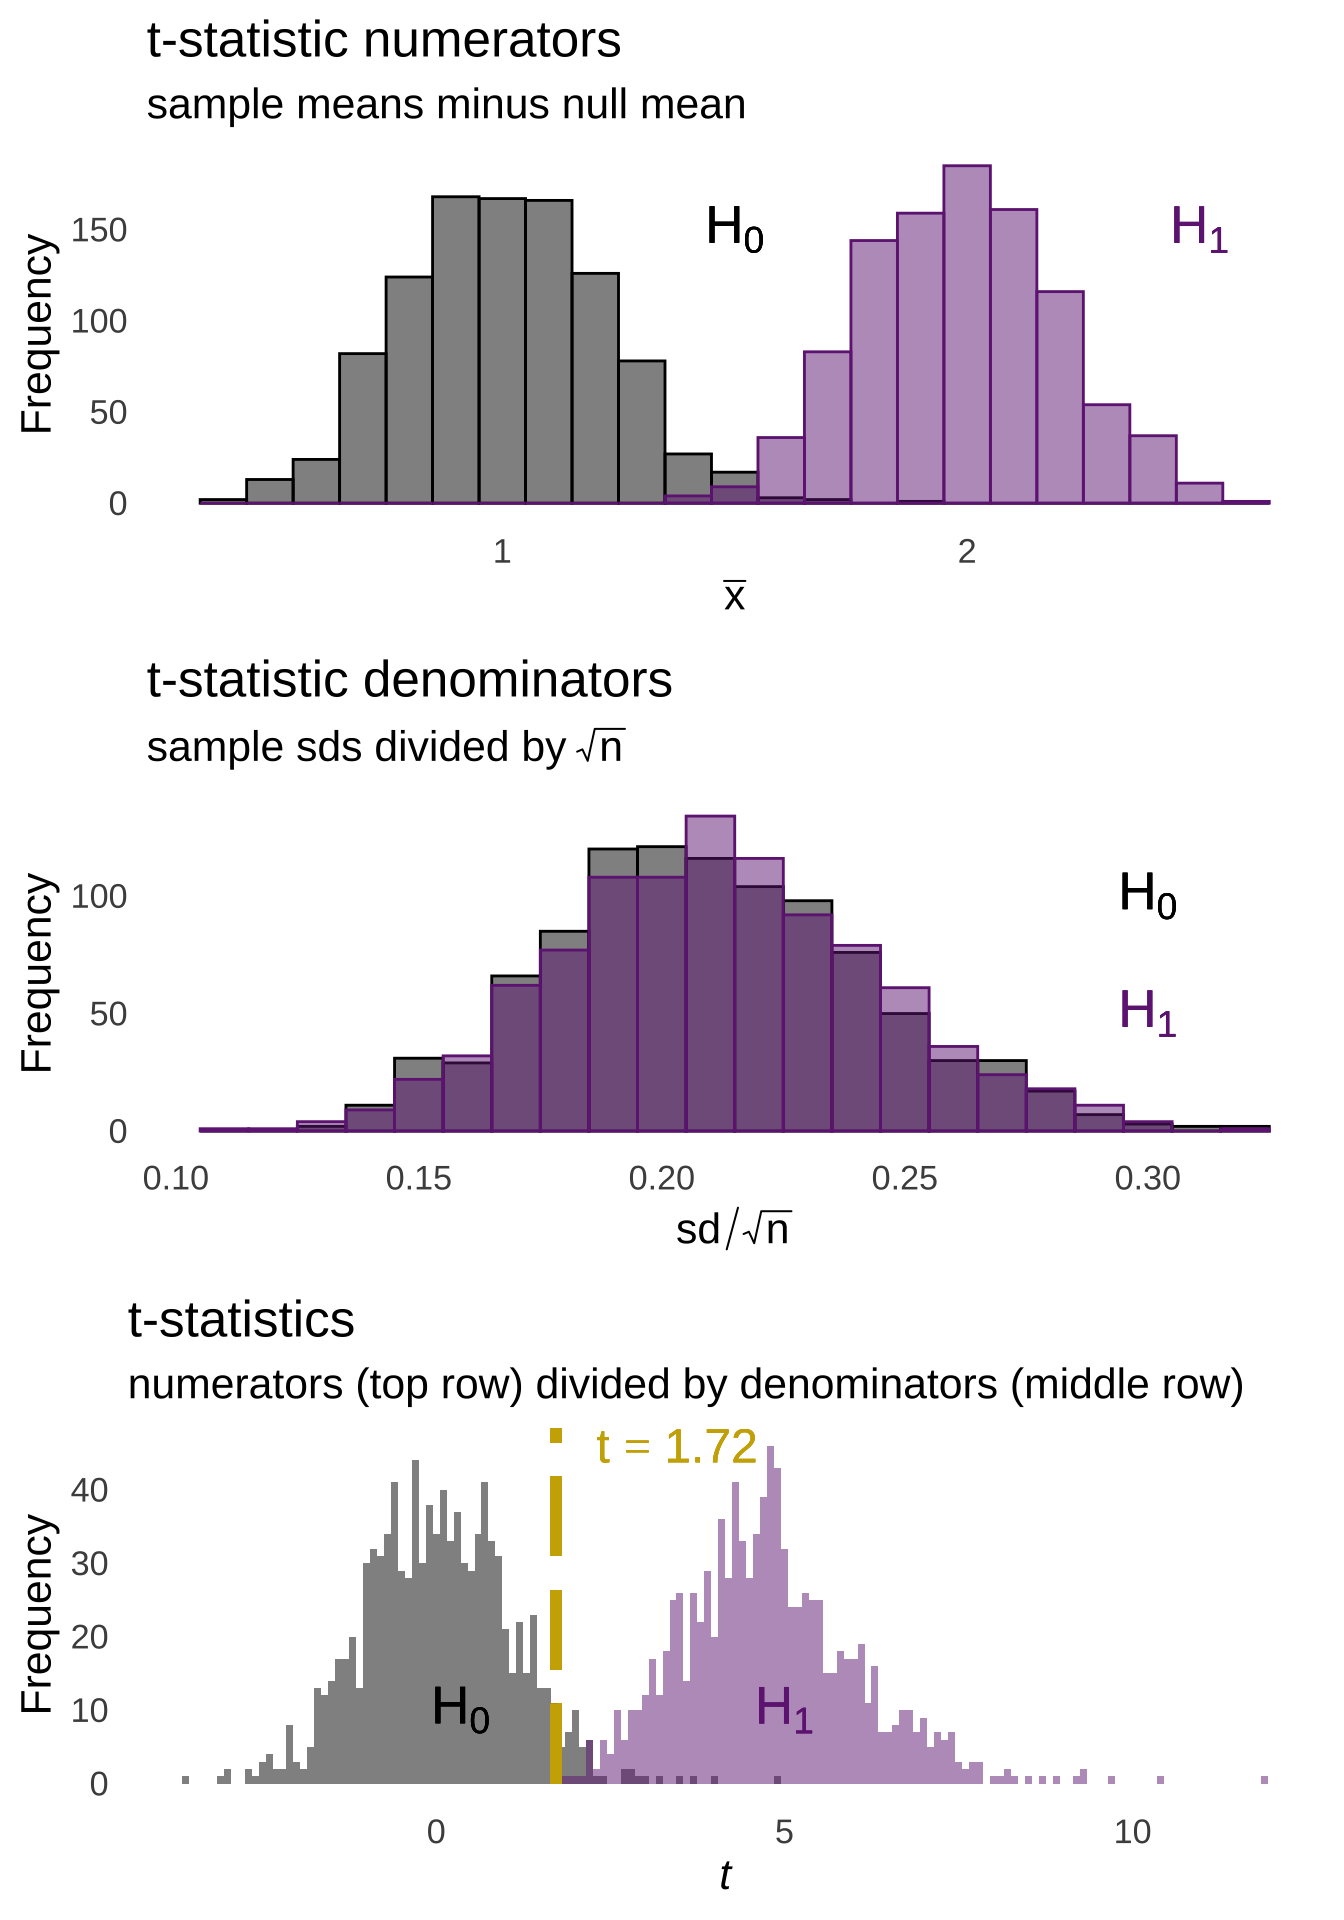 Steps of Calculating $t$-statistics for Samples Drawn from Null and Alternative Distributions